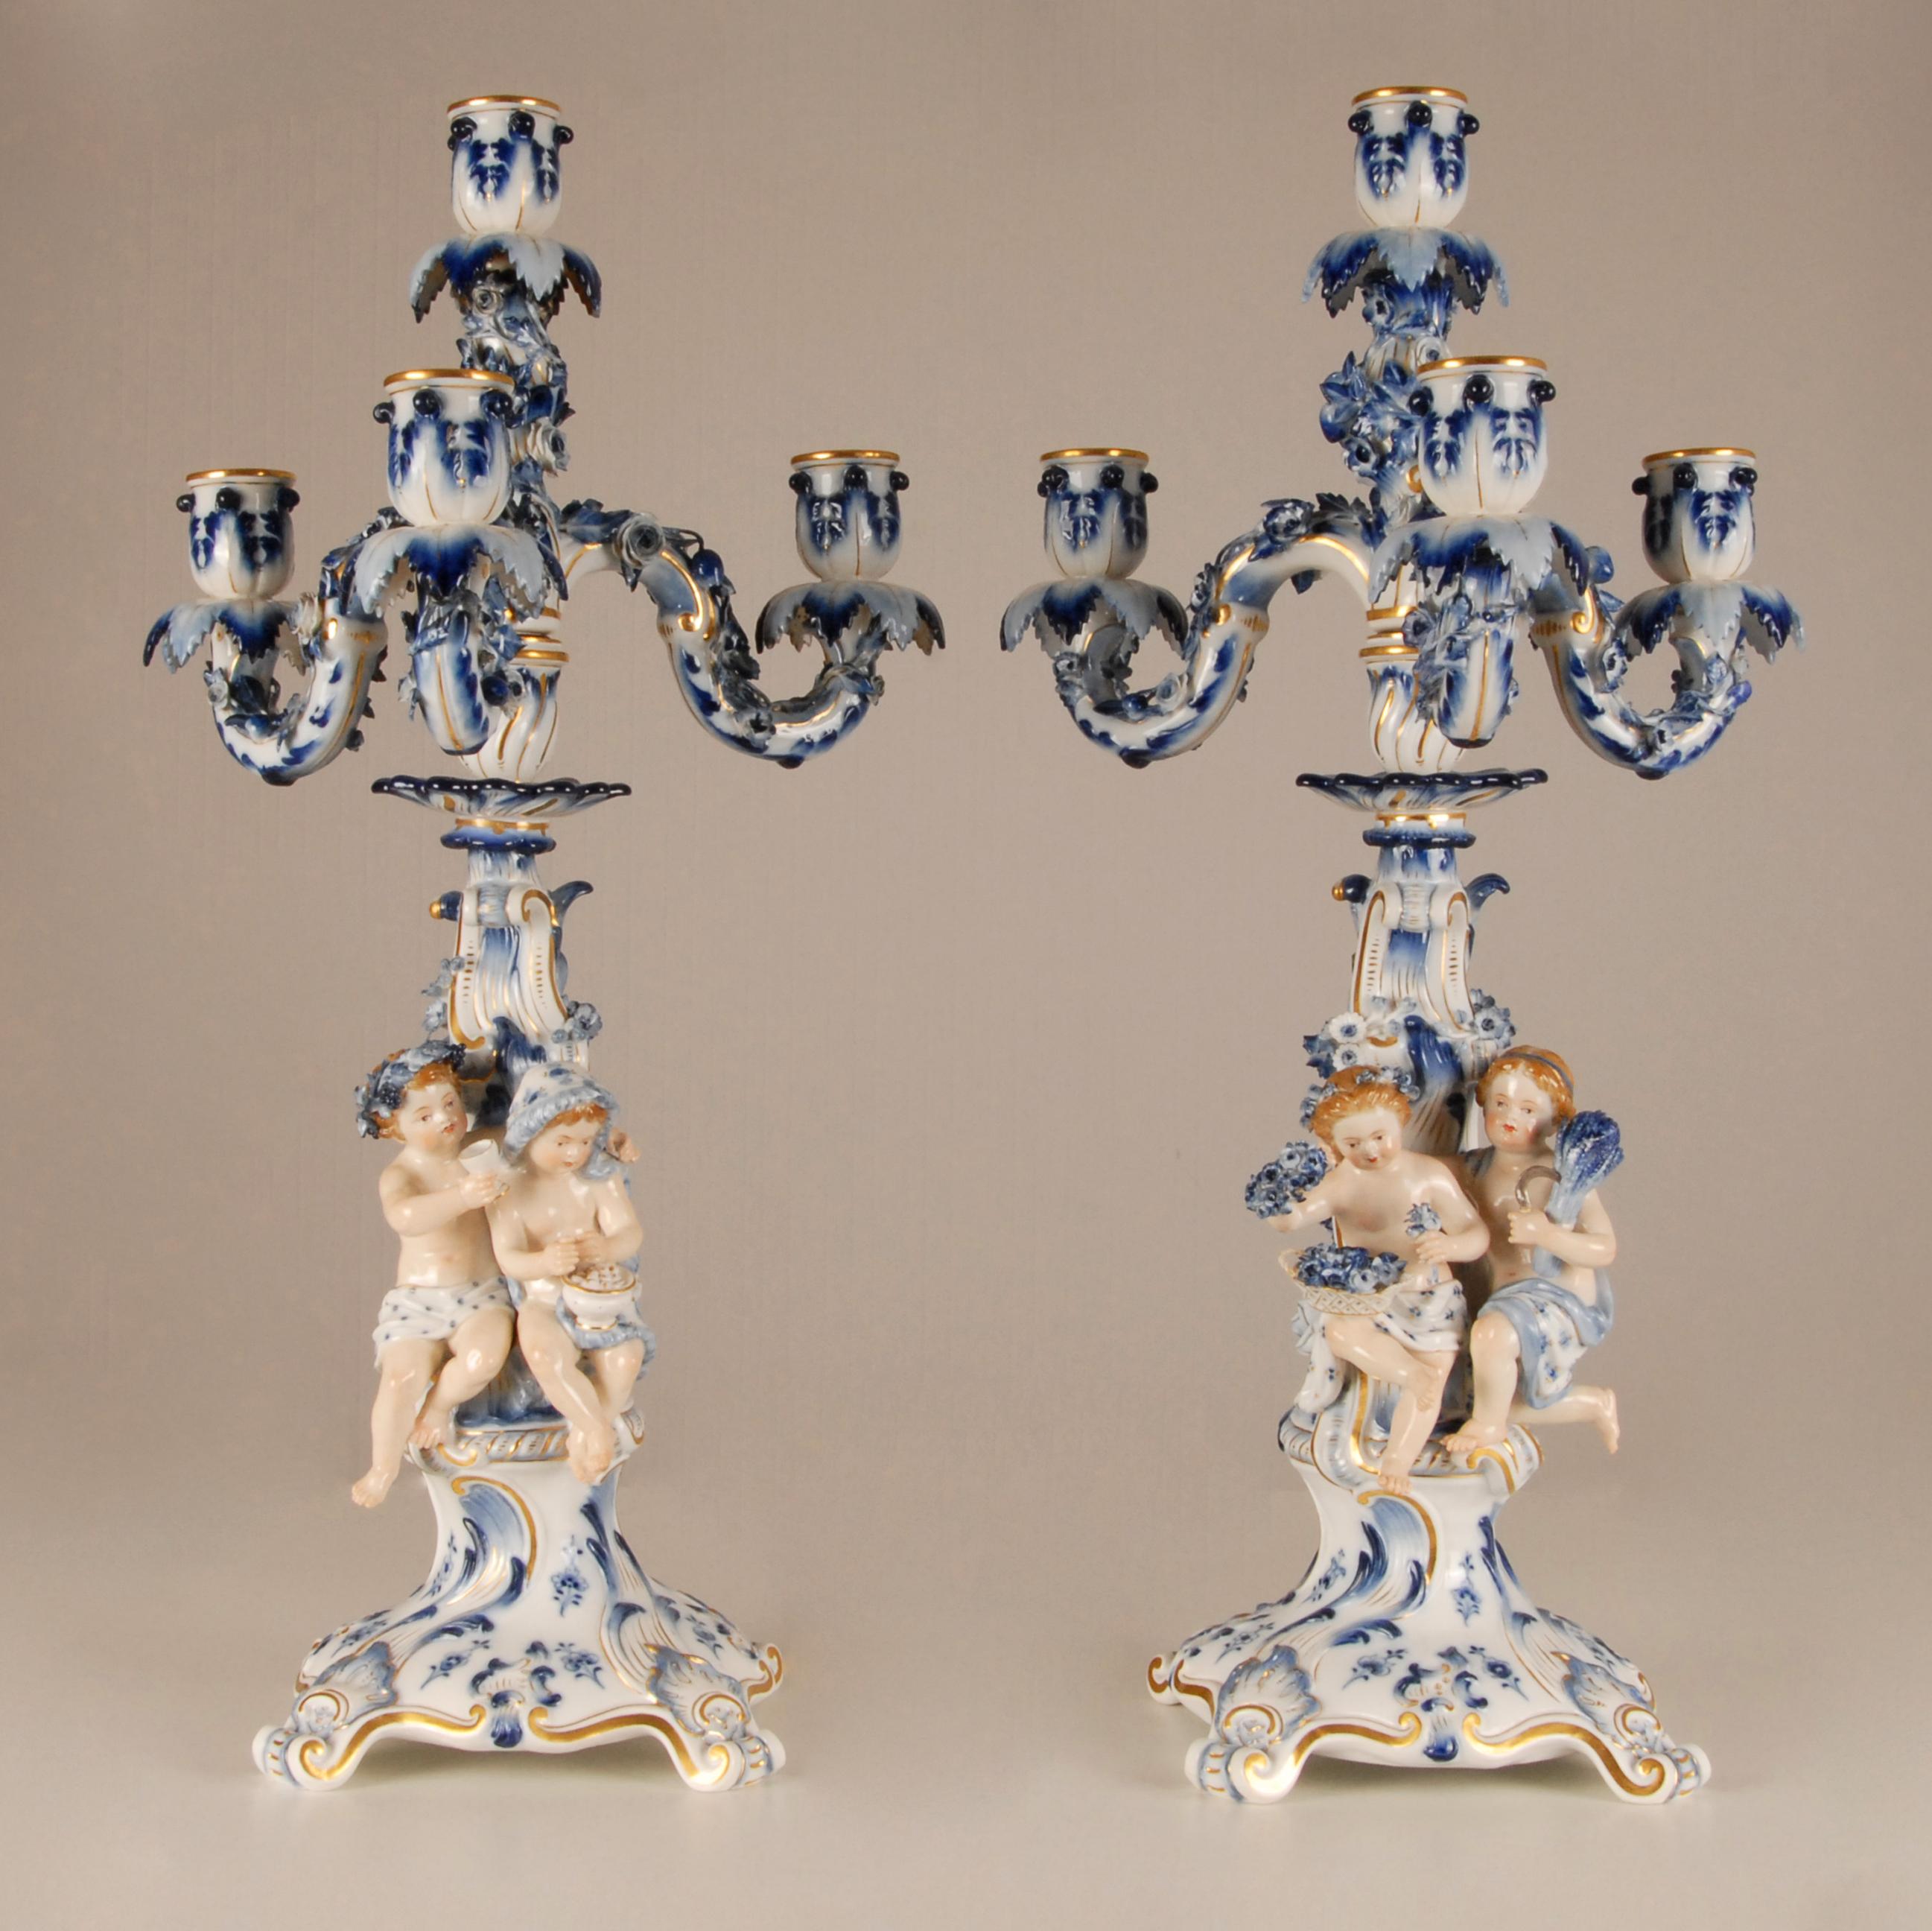 19th century Meissen Porcelain Candelabras figurine white and Blue Union, a Pair For Sale 8